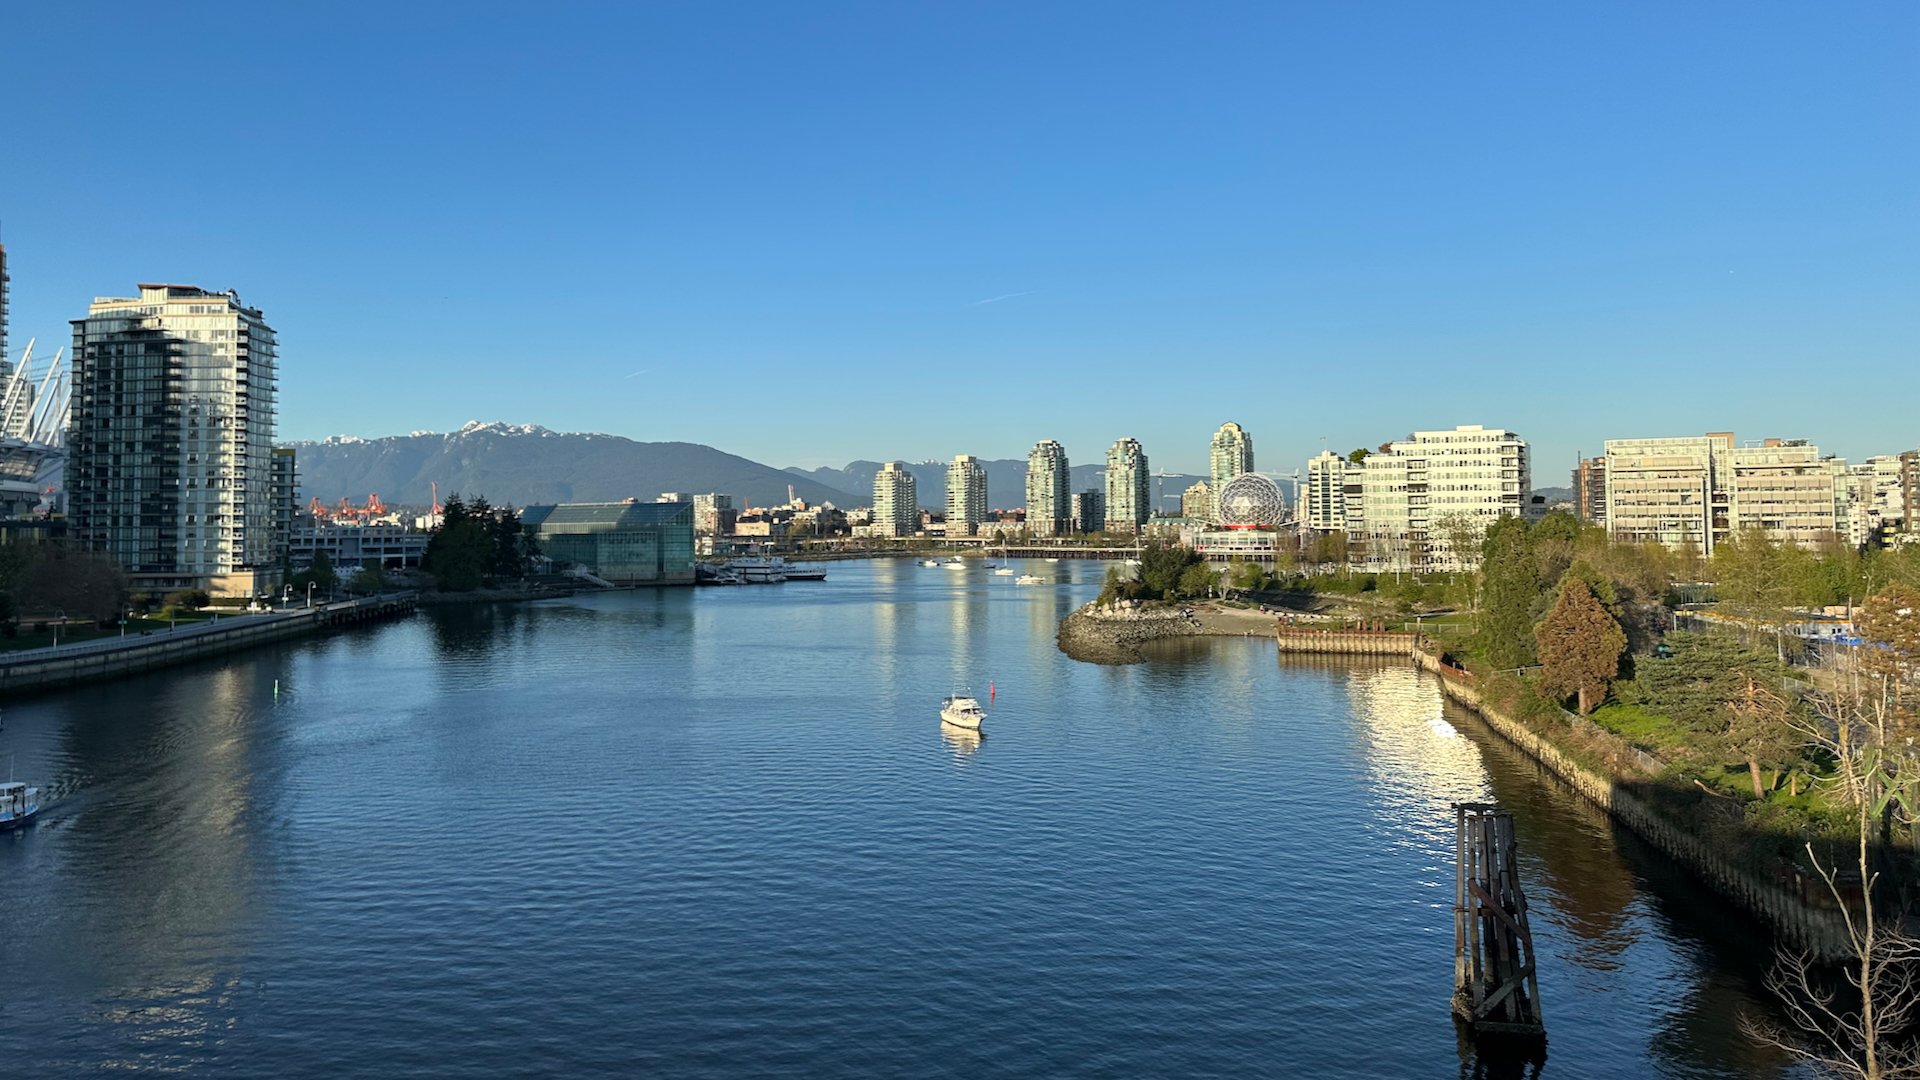  It was a beautiful evening as we walked over the Cambie Street bridge towards the stadium. 